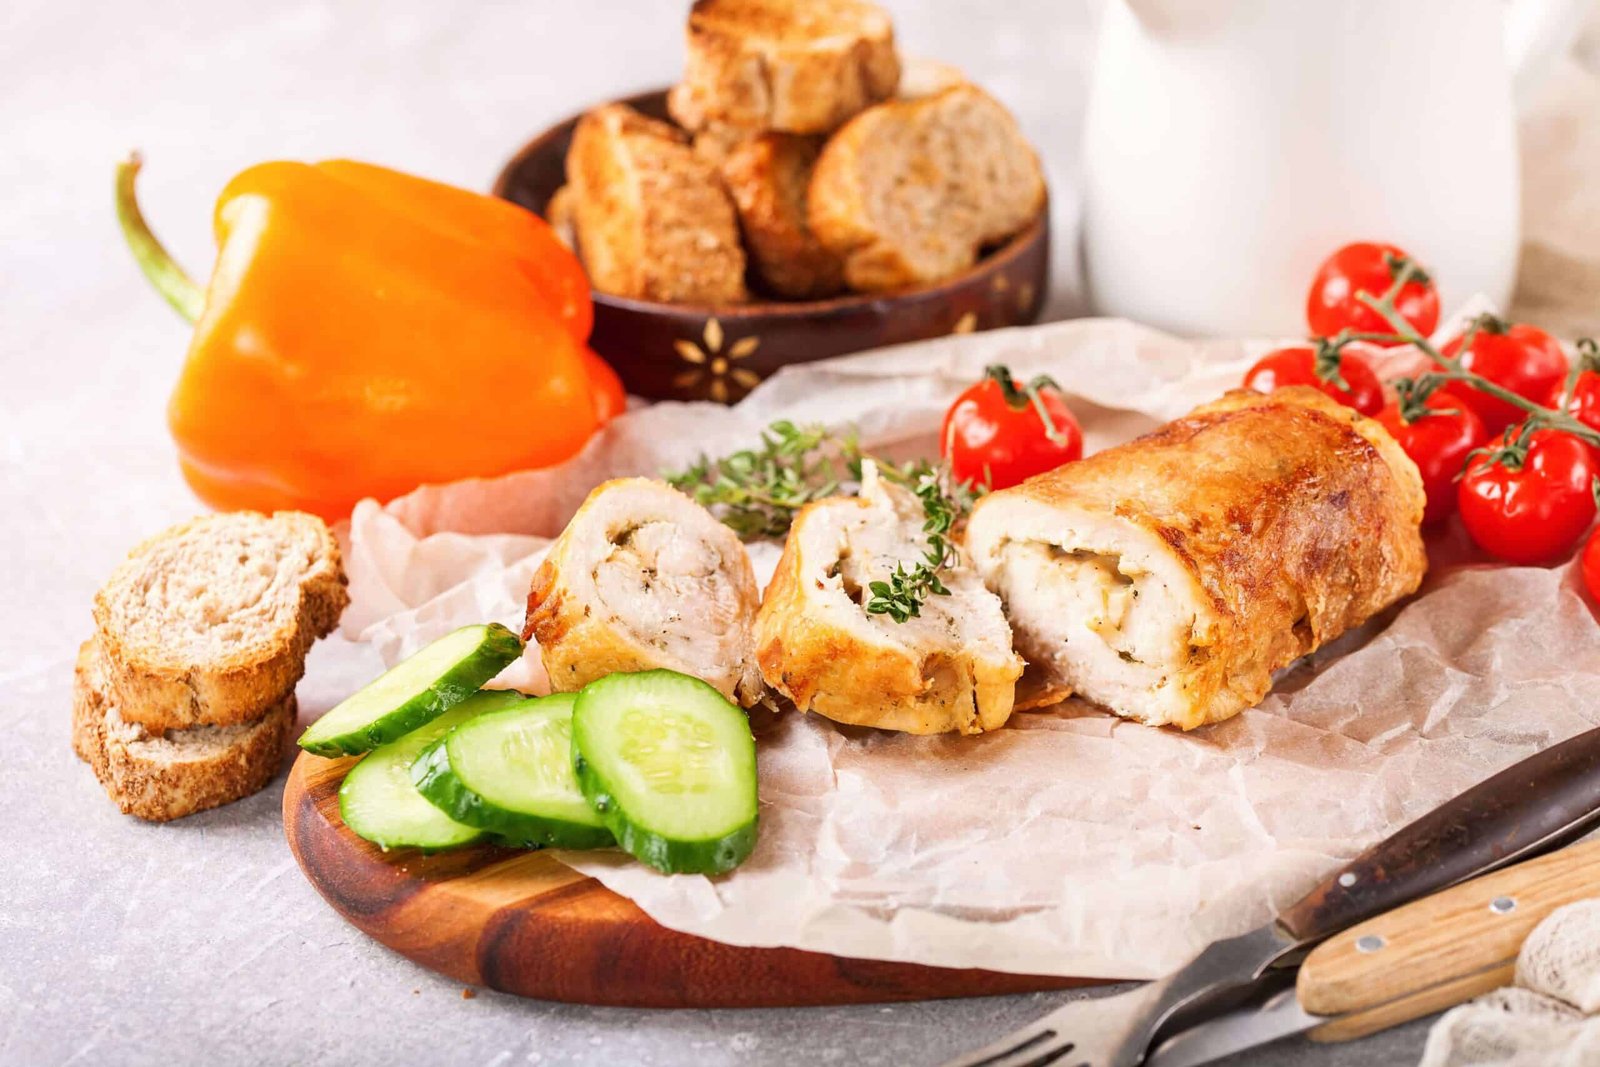 chicken roll-up on wood, orange pepper, tomatoes and sliced bread in wooden plate with white background